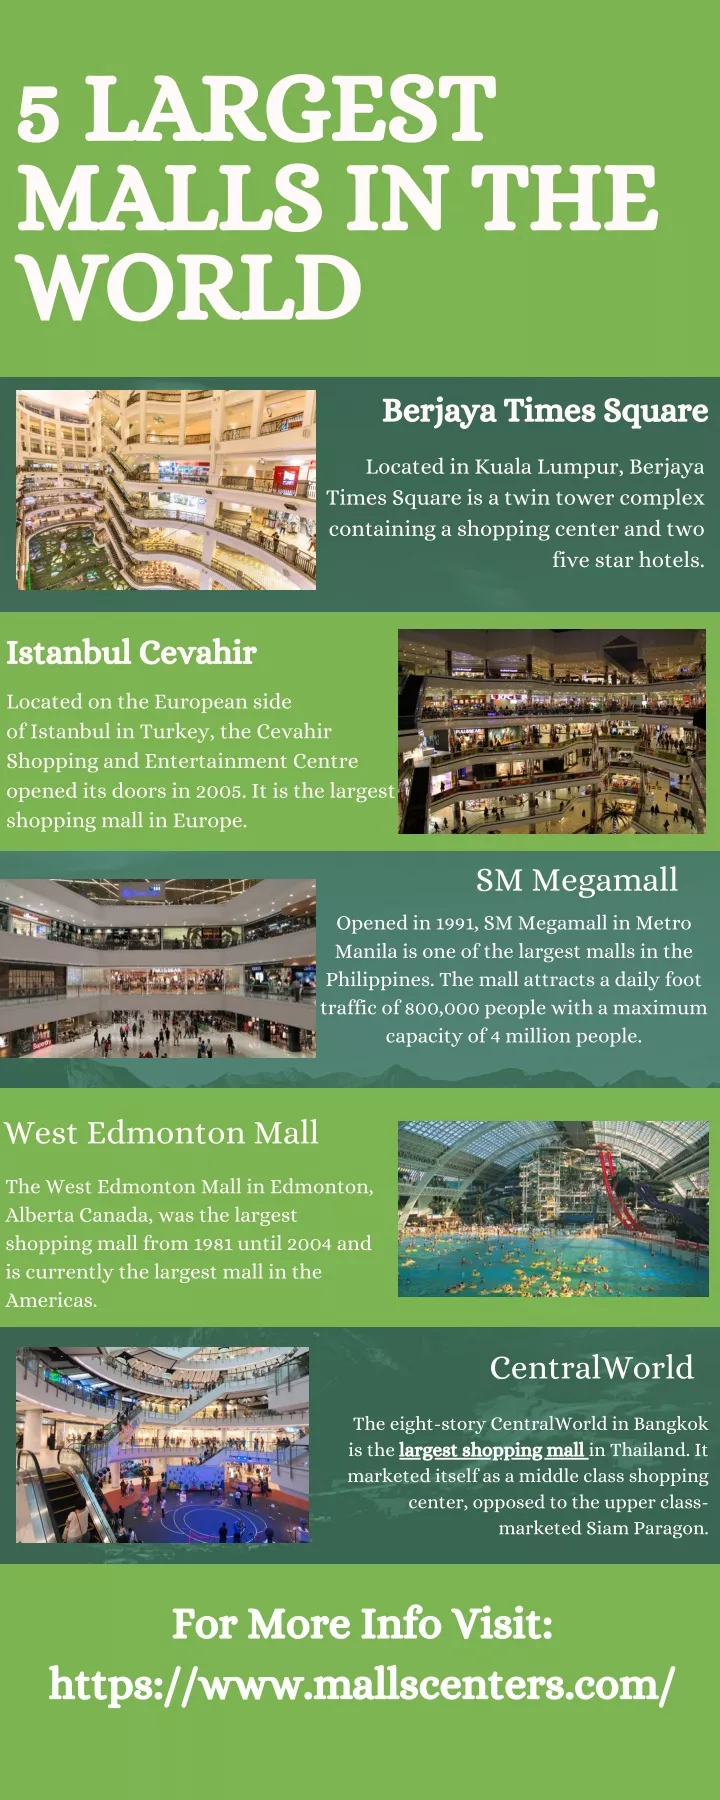 5 largest malls in the world